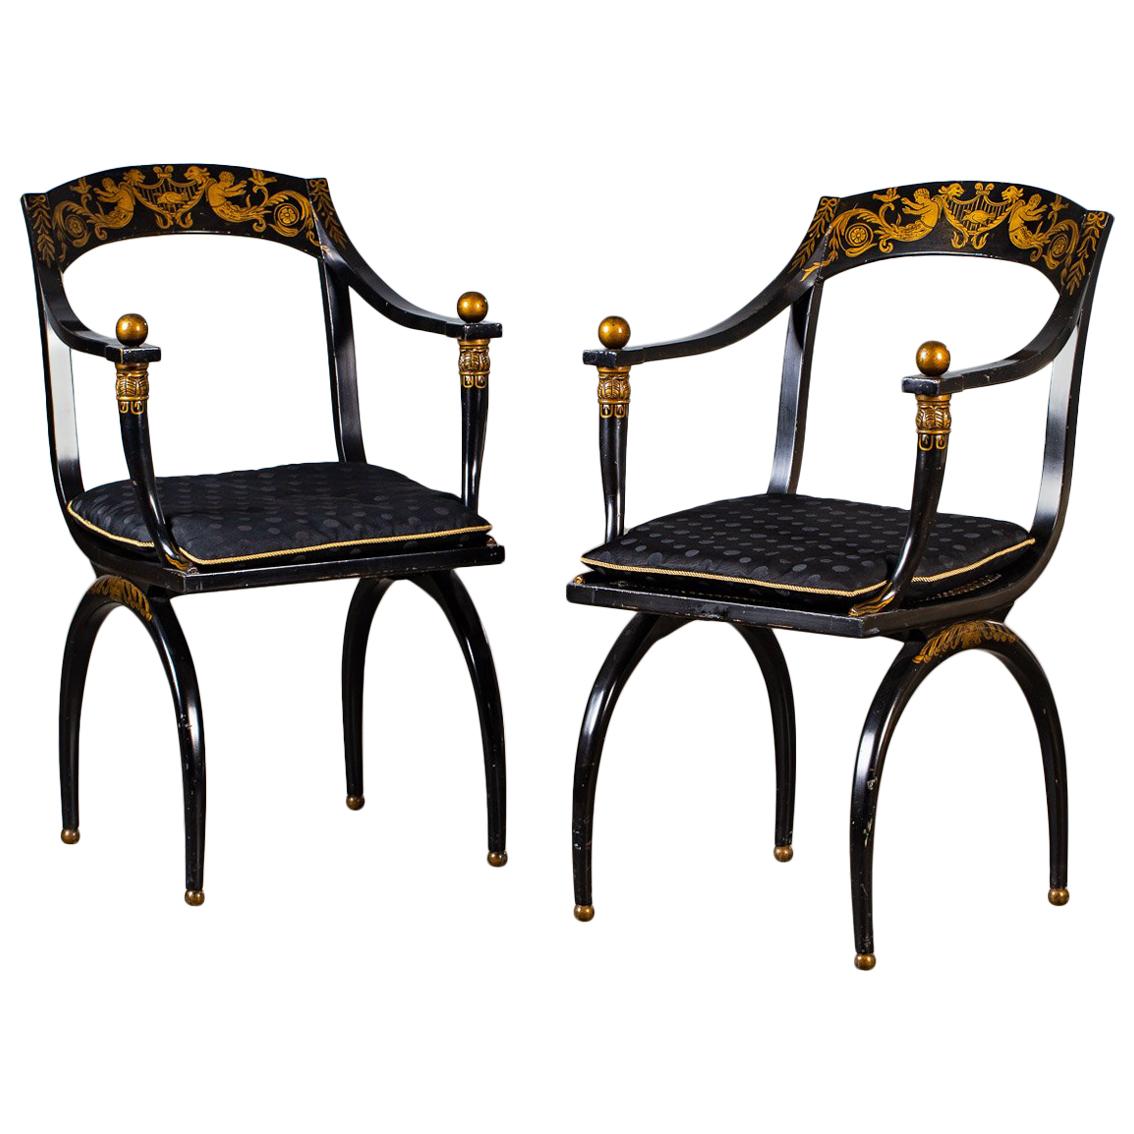 Pair of Vintage French Empire Chapuis Ebonized Gilt Chairs, circa 1950 For Sale